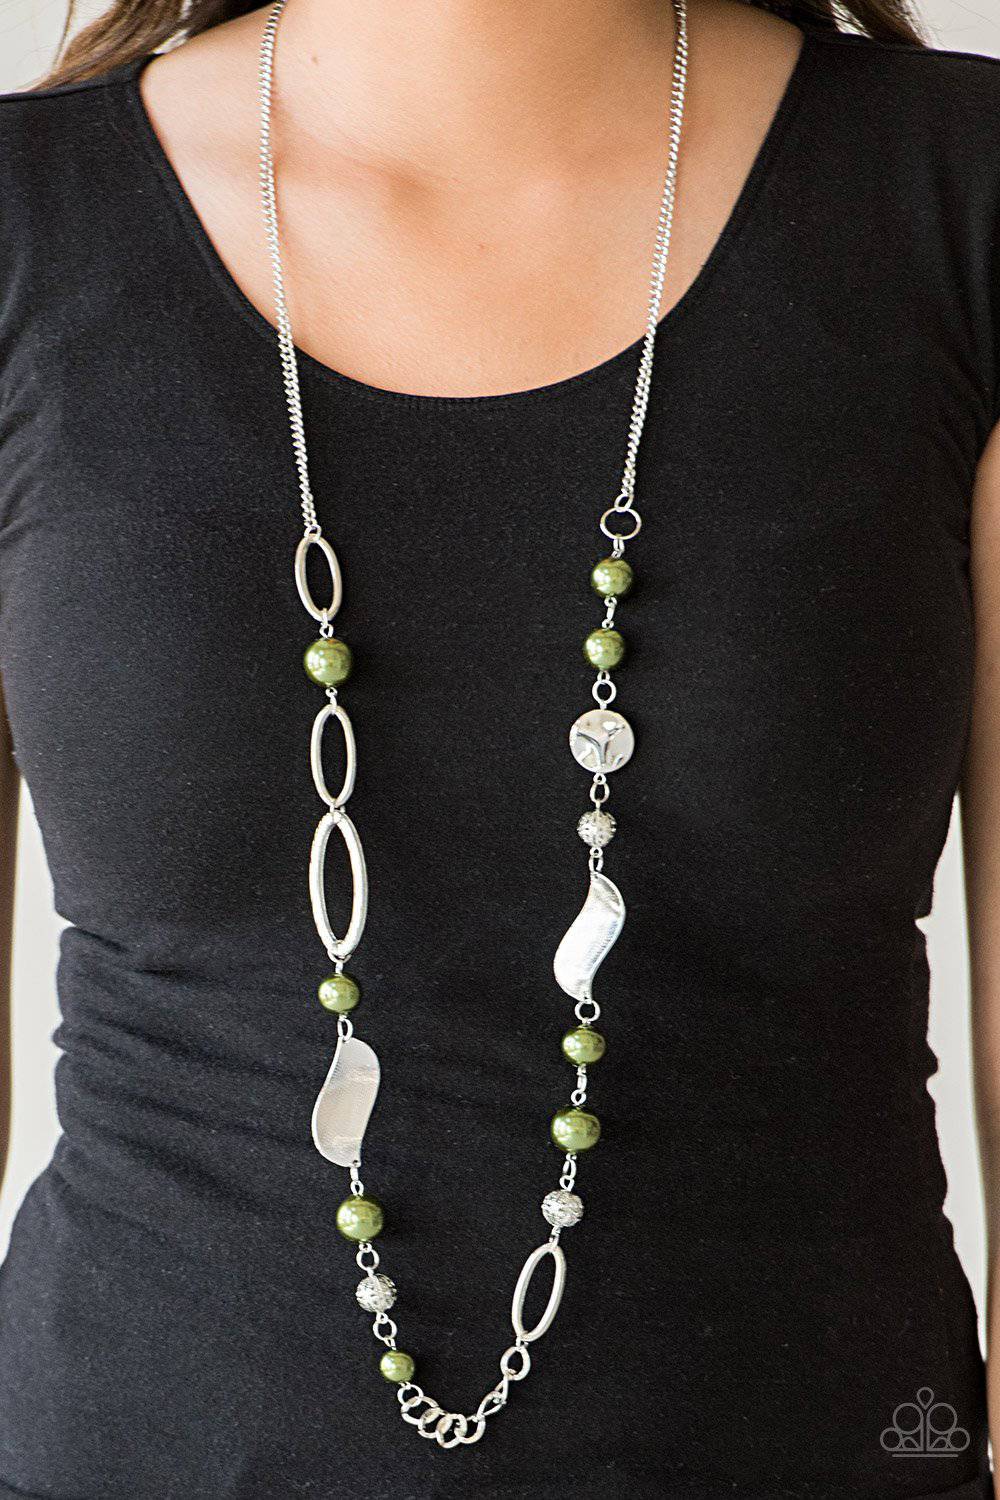 All About Me - Green Pearls & Silver Necklace - Paparazzi Accessories - GlaMarous Titi Jewels